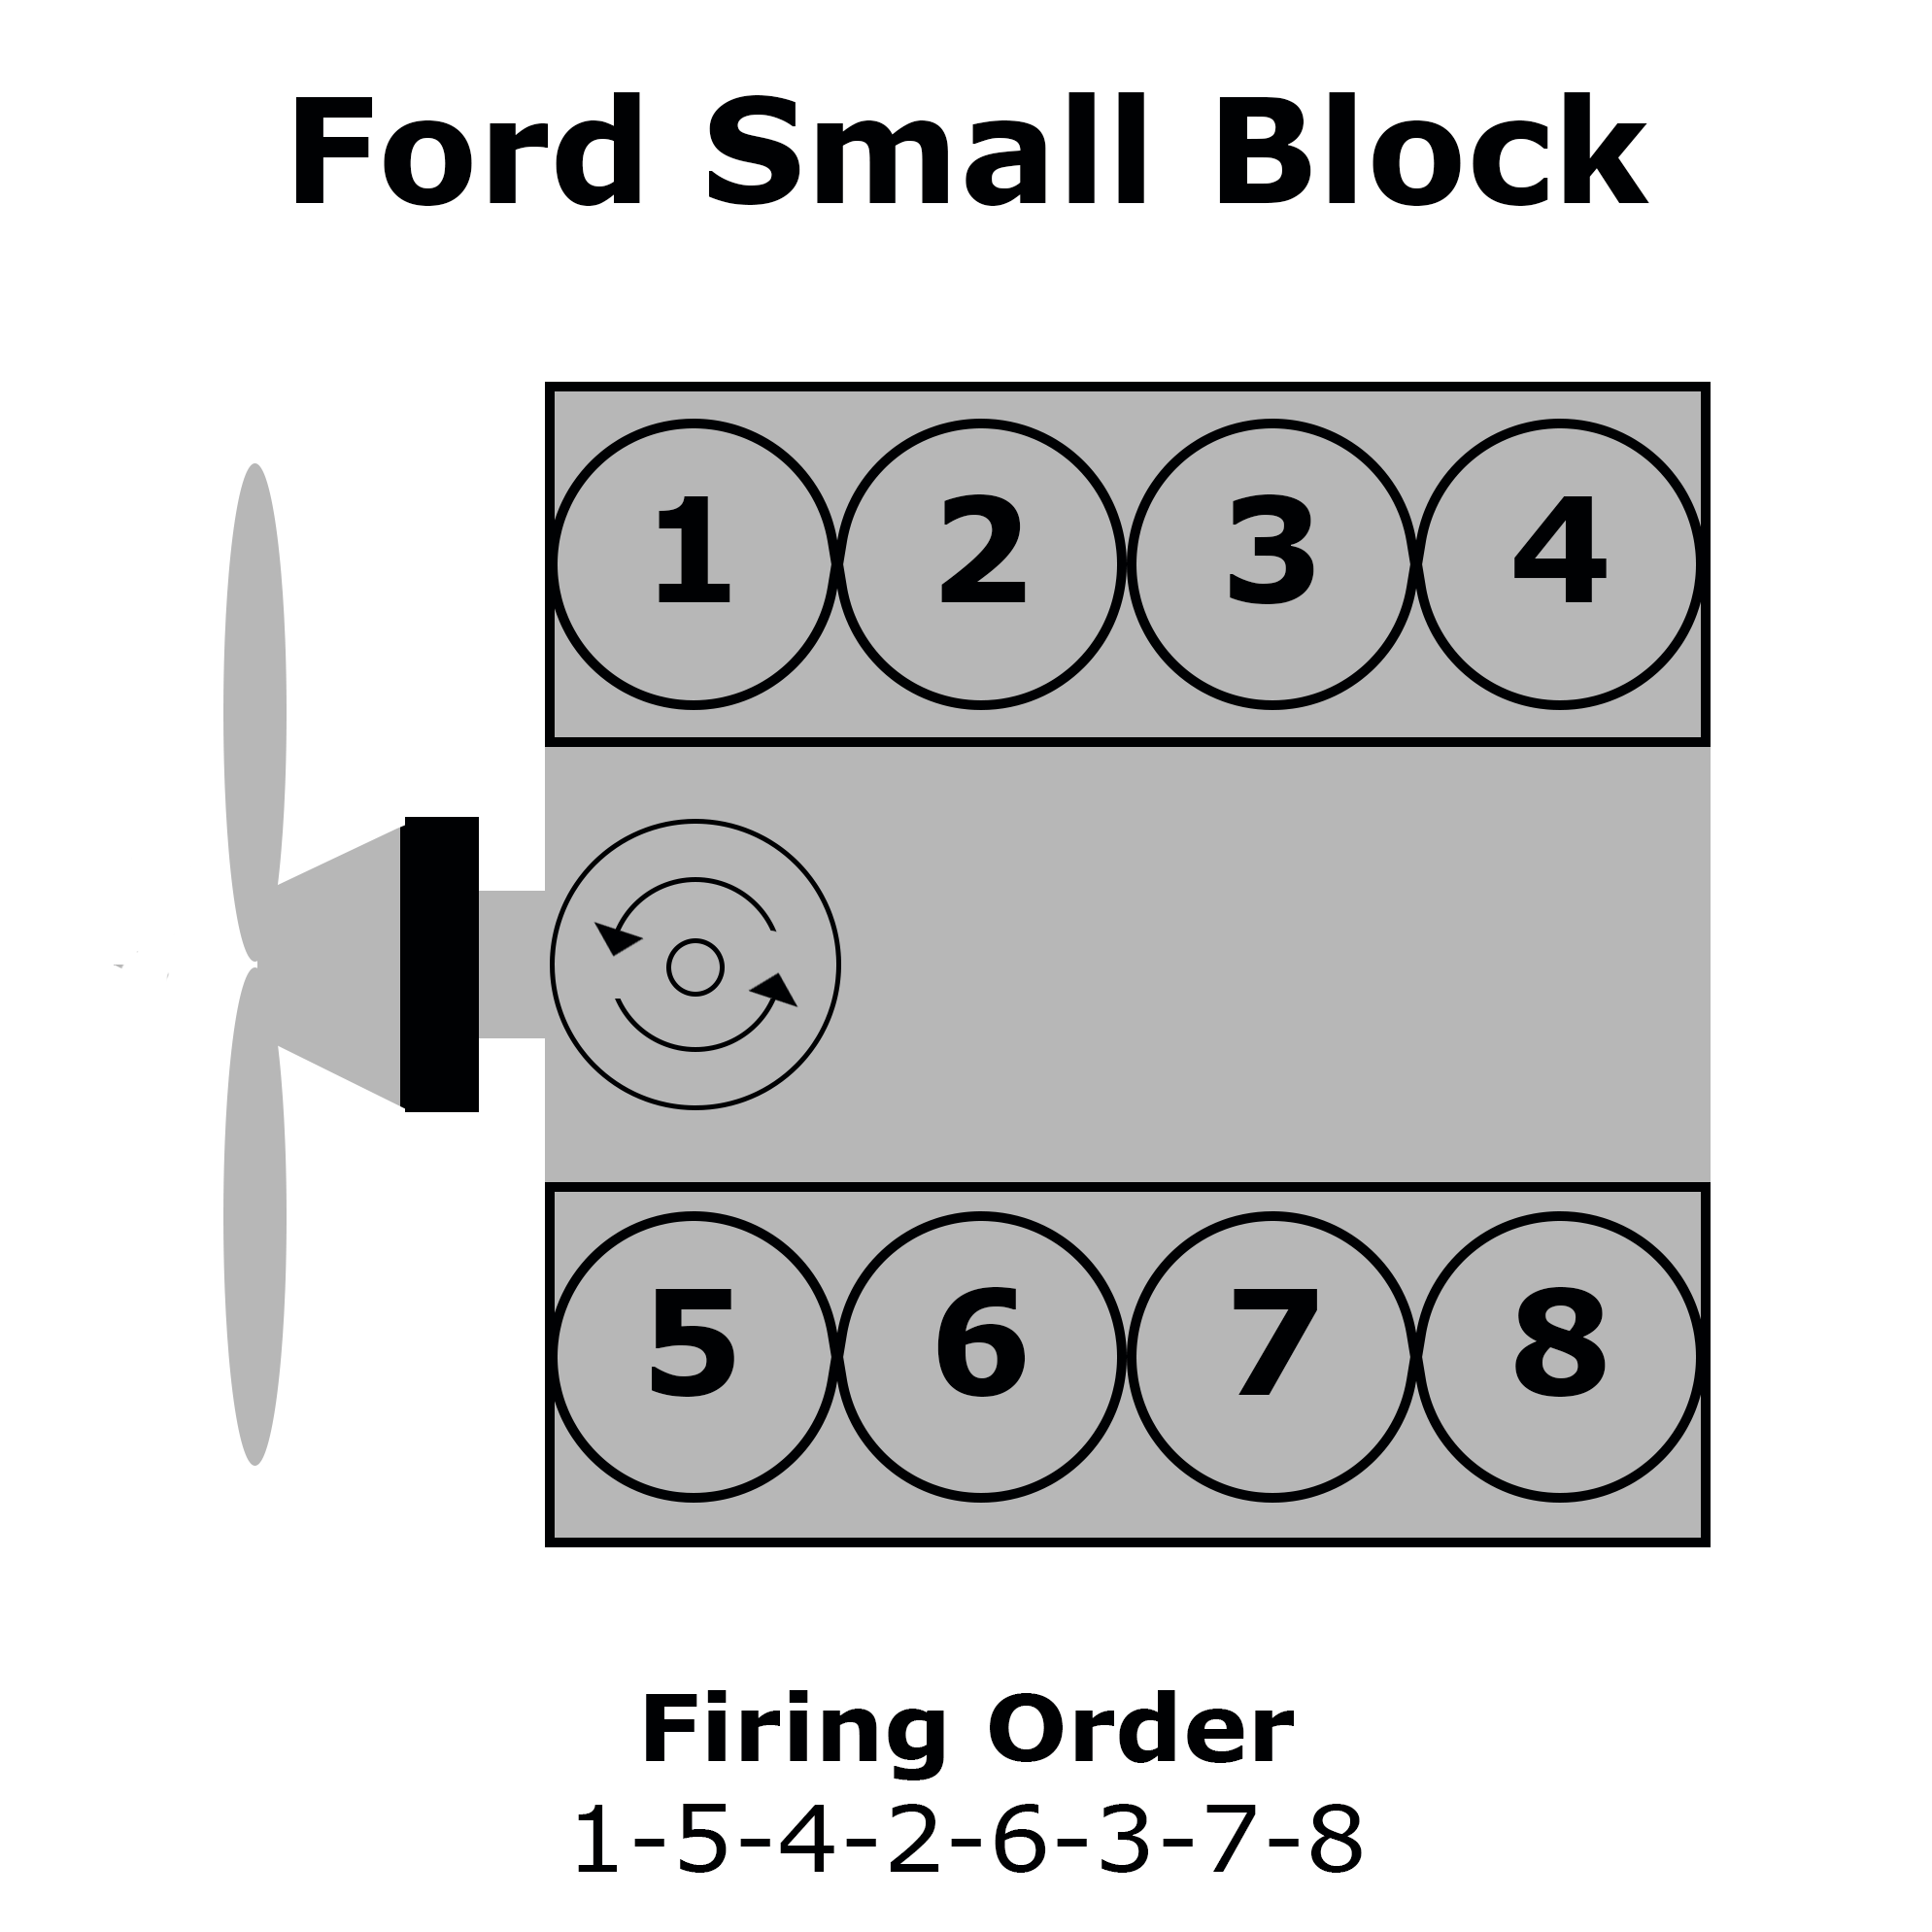 Ford Small Block Cylinder Numbering, Distributor Rotation, and Firing Order